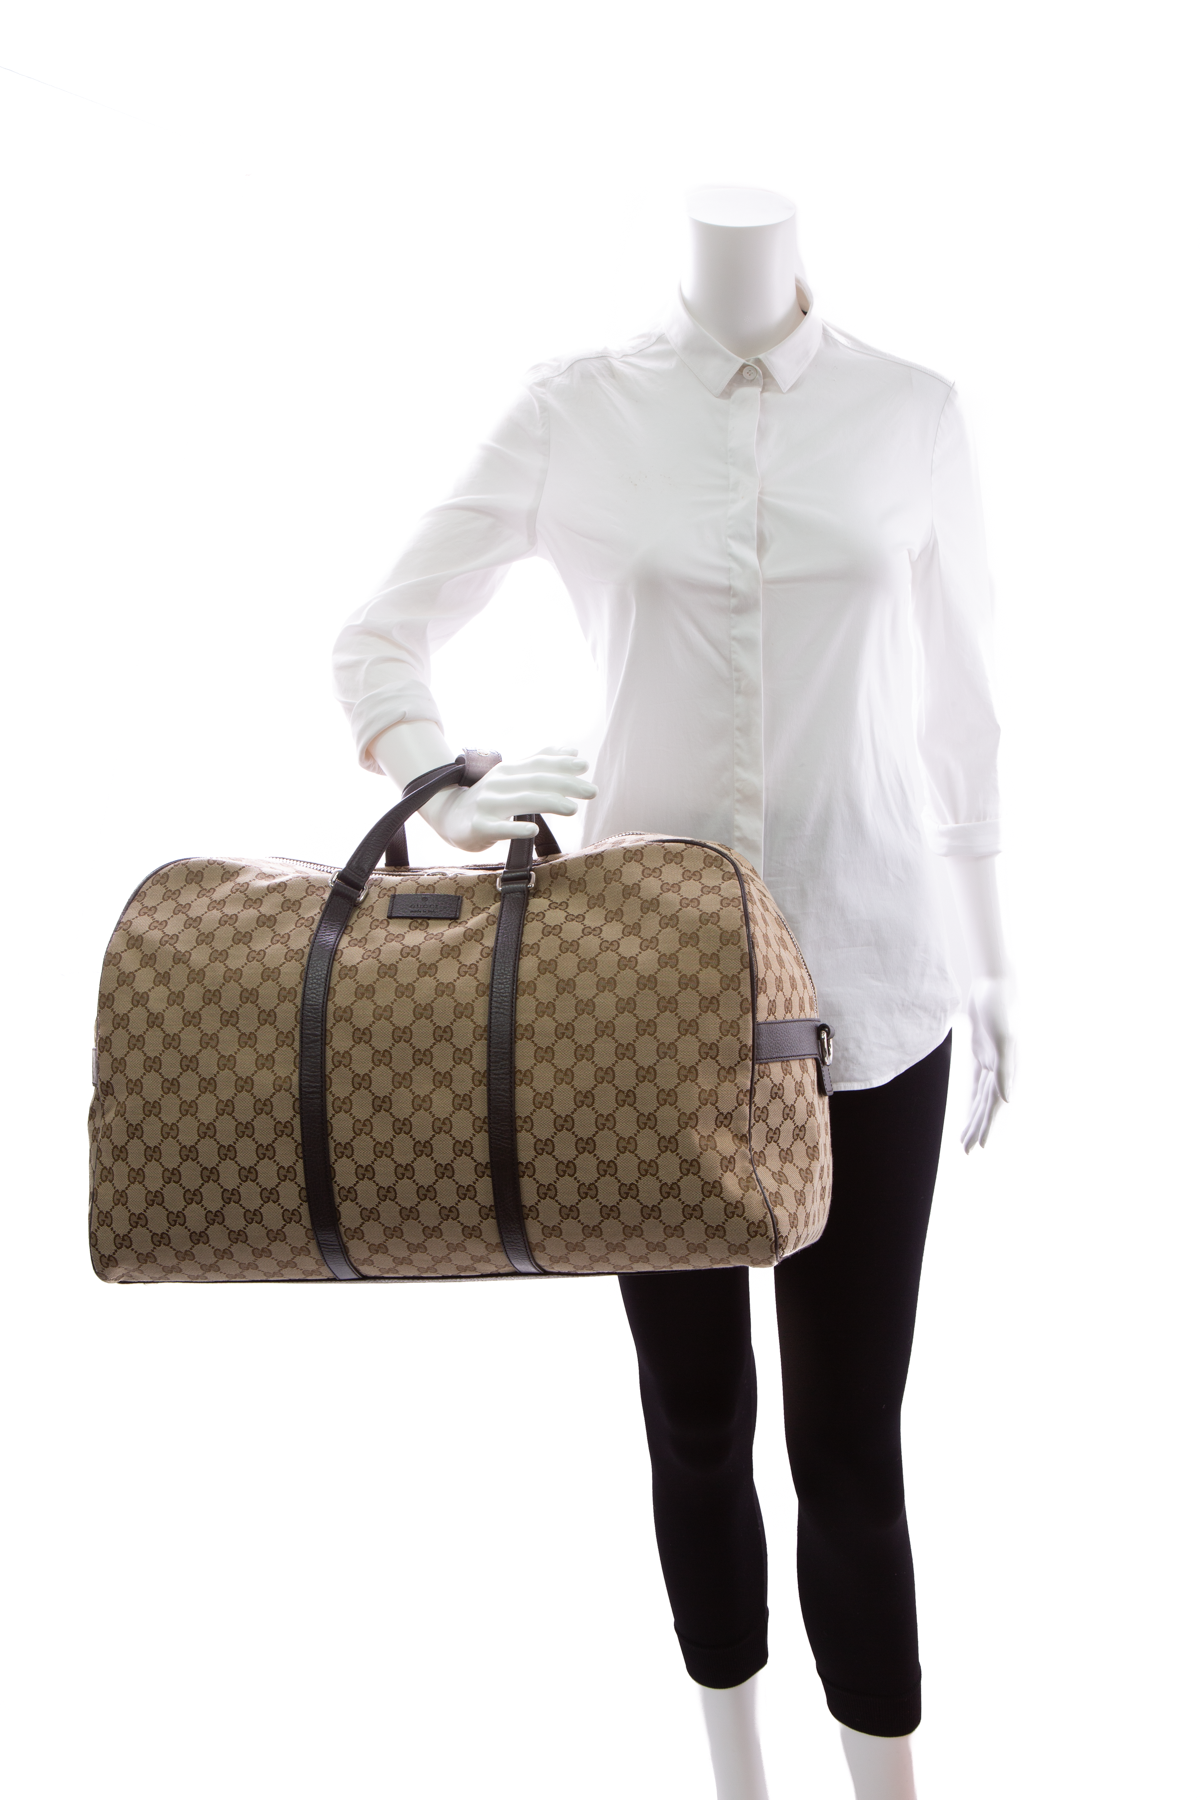 Gucci Monogram Canvas Brown Overnight Duffle Travel Bag – I MISS YOU VINTAGE